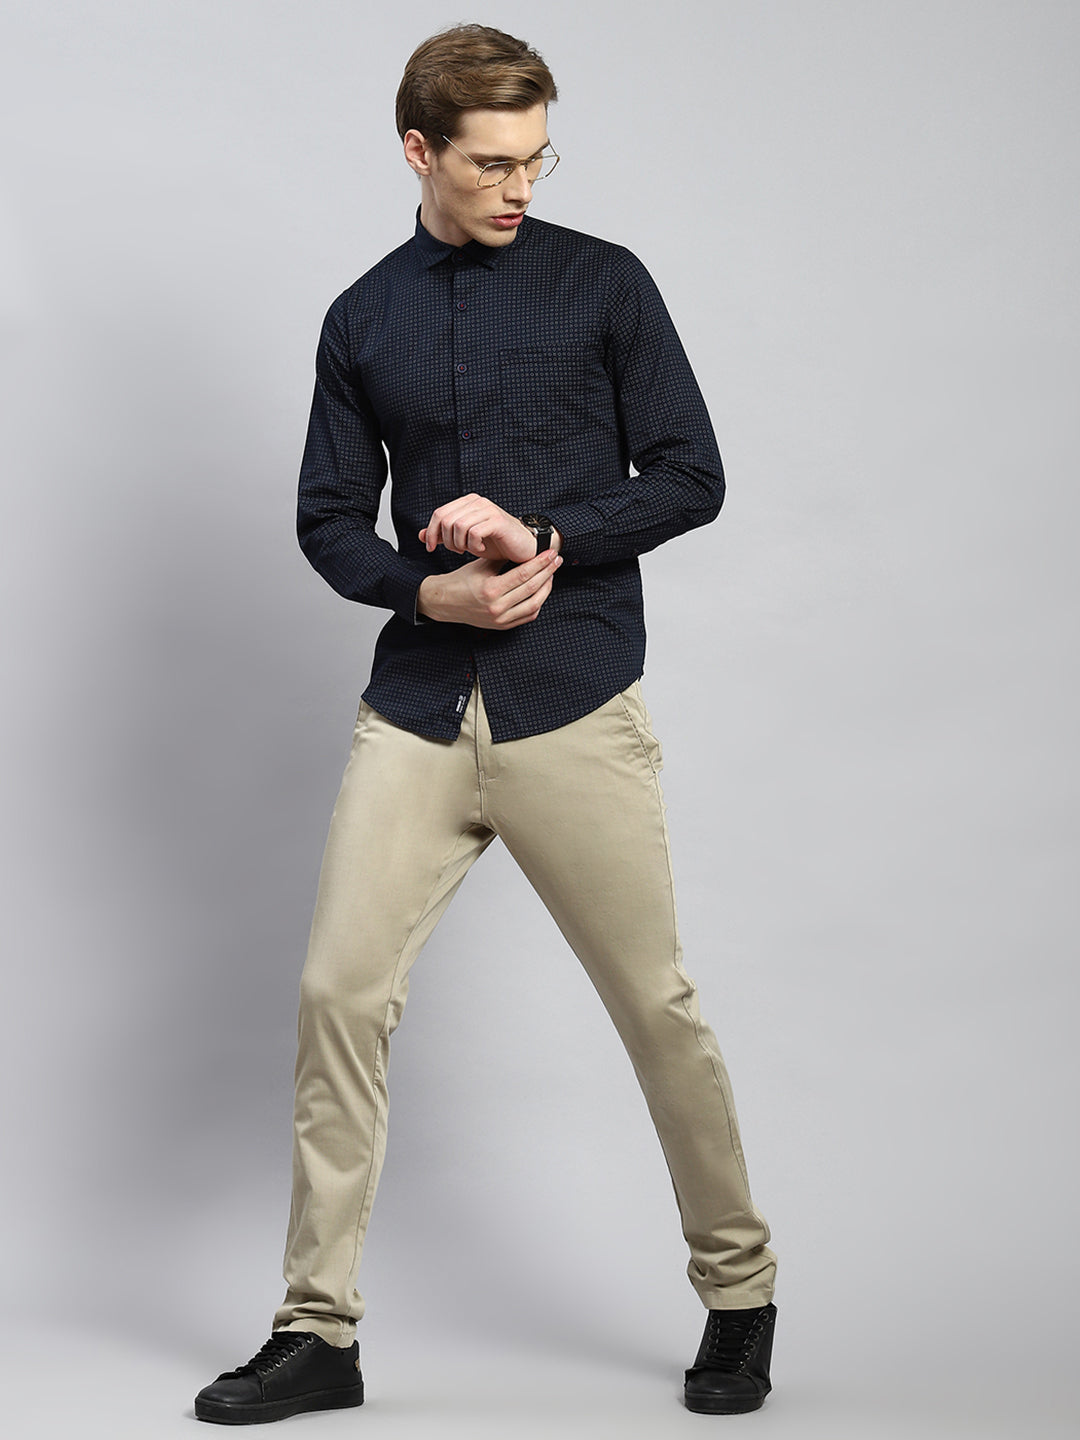 Buy Branded Casual Men Shirts Online in India - Monte Carlo